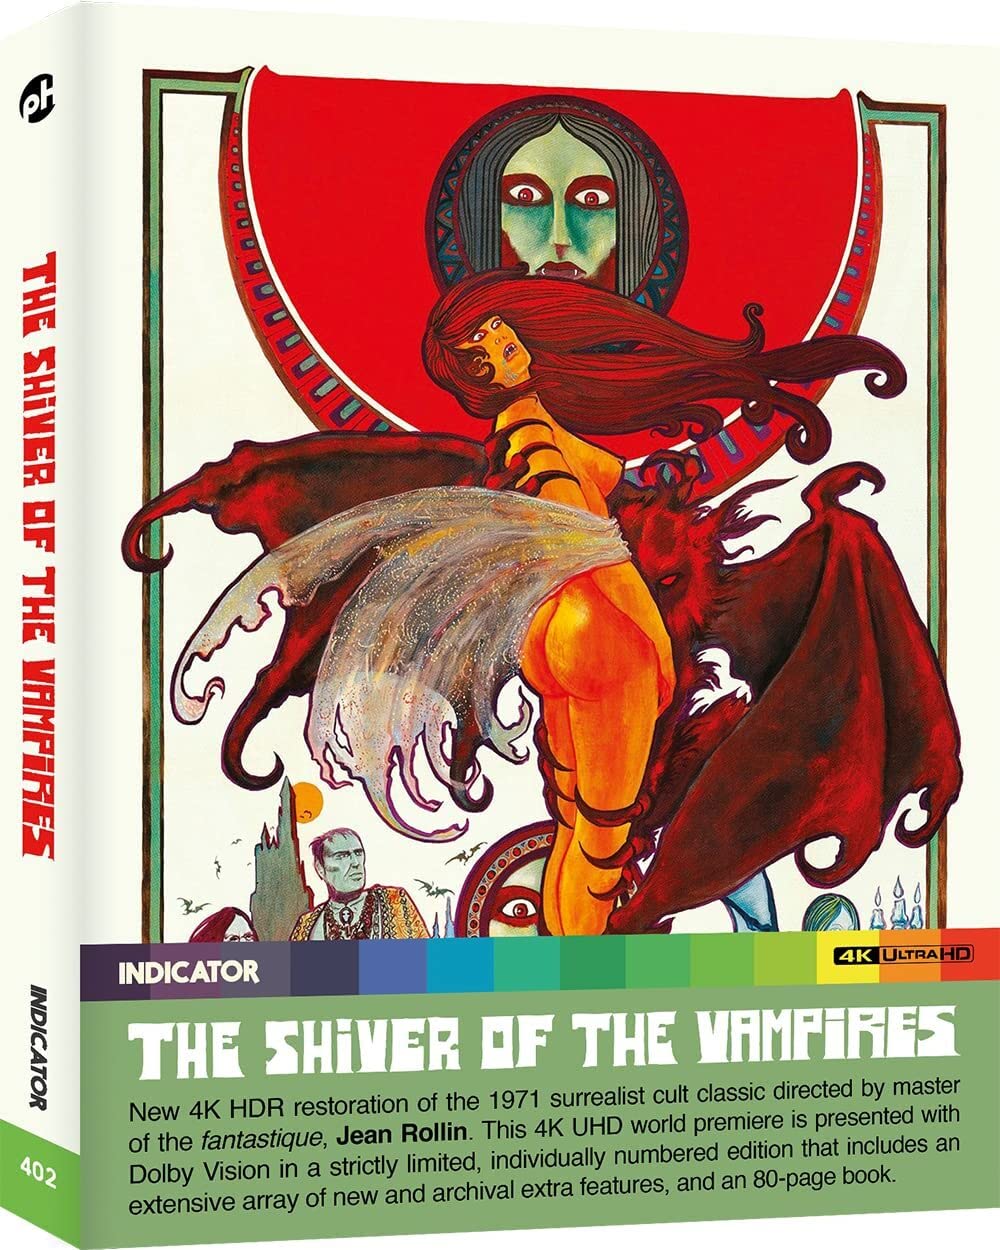 THE SHIVER OF THE VAMPIRES (LIMITED EDITION) 4K UHD